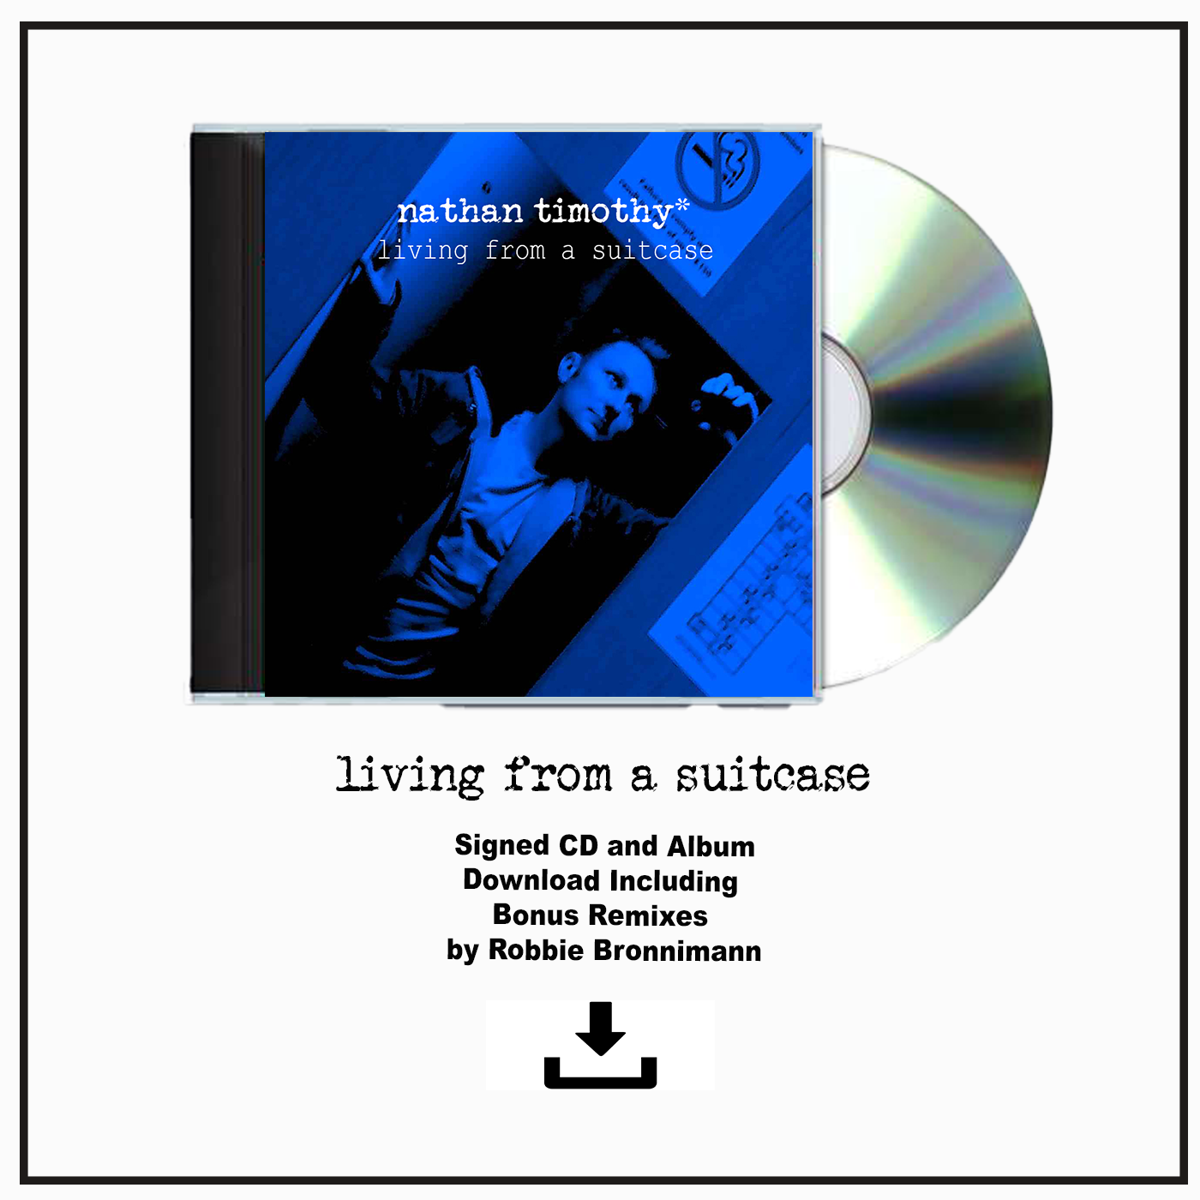 Living From A Suitcase 2019 Version - (CD) and (HQ Digital Download) Bundle - nathan timothy*